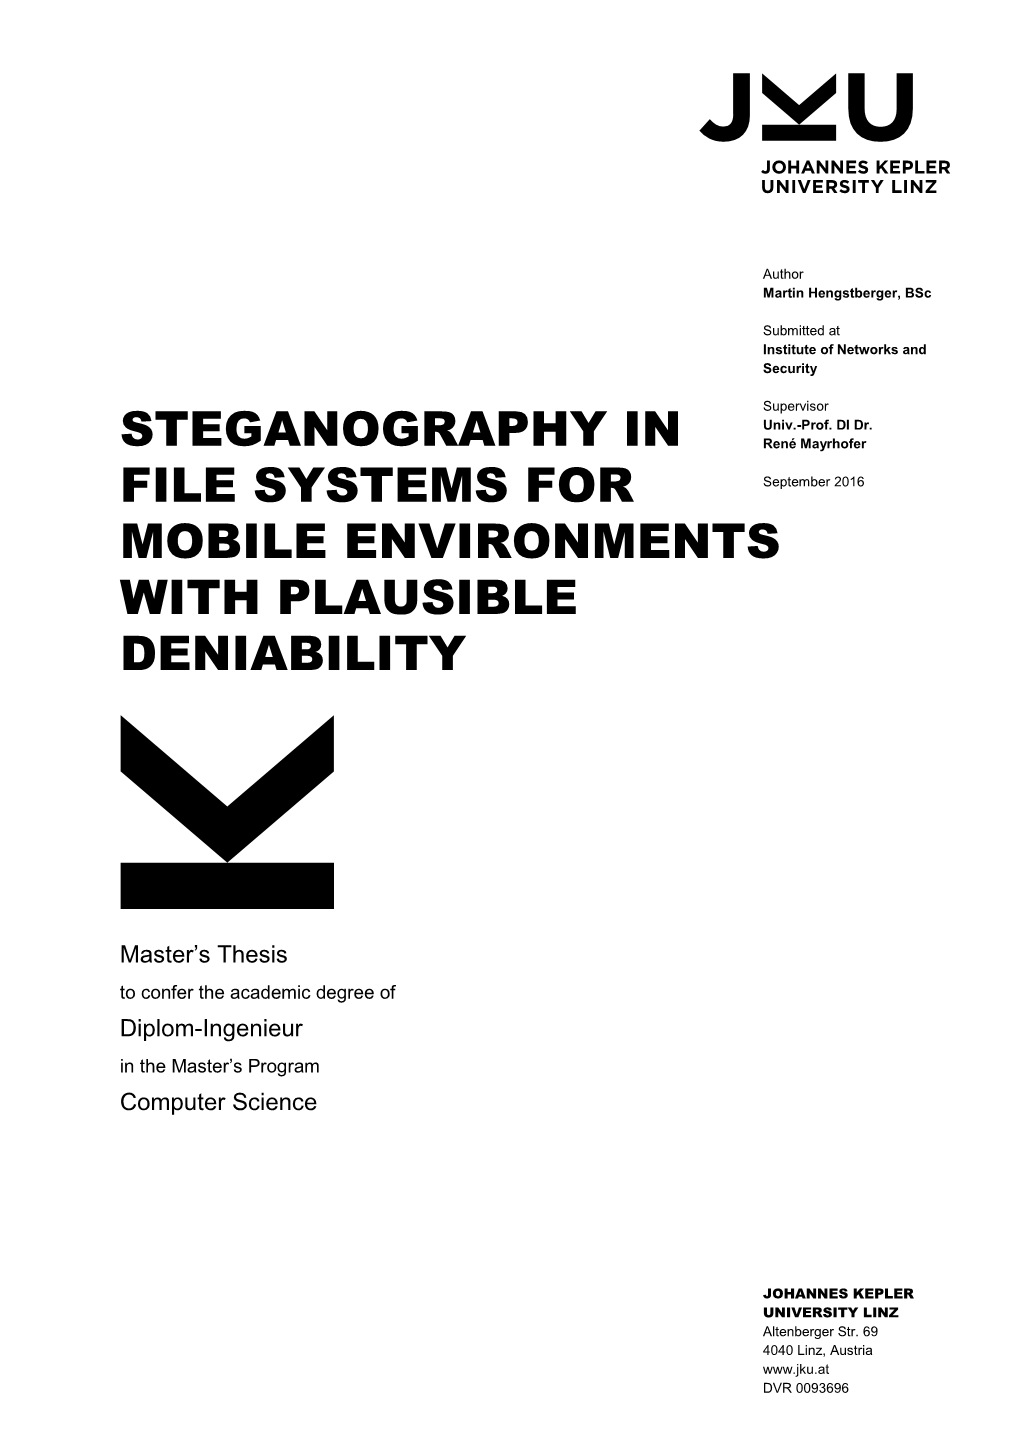 Steganography in File Systems for Mobile Environments with Plausible